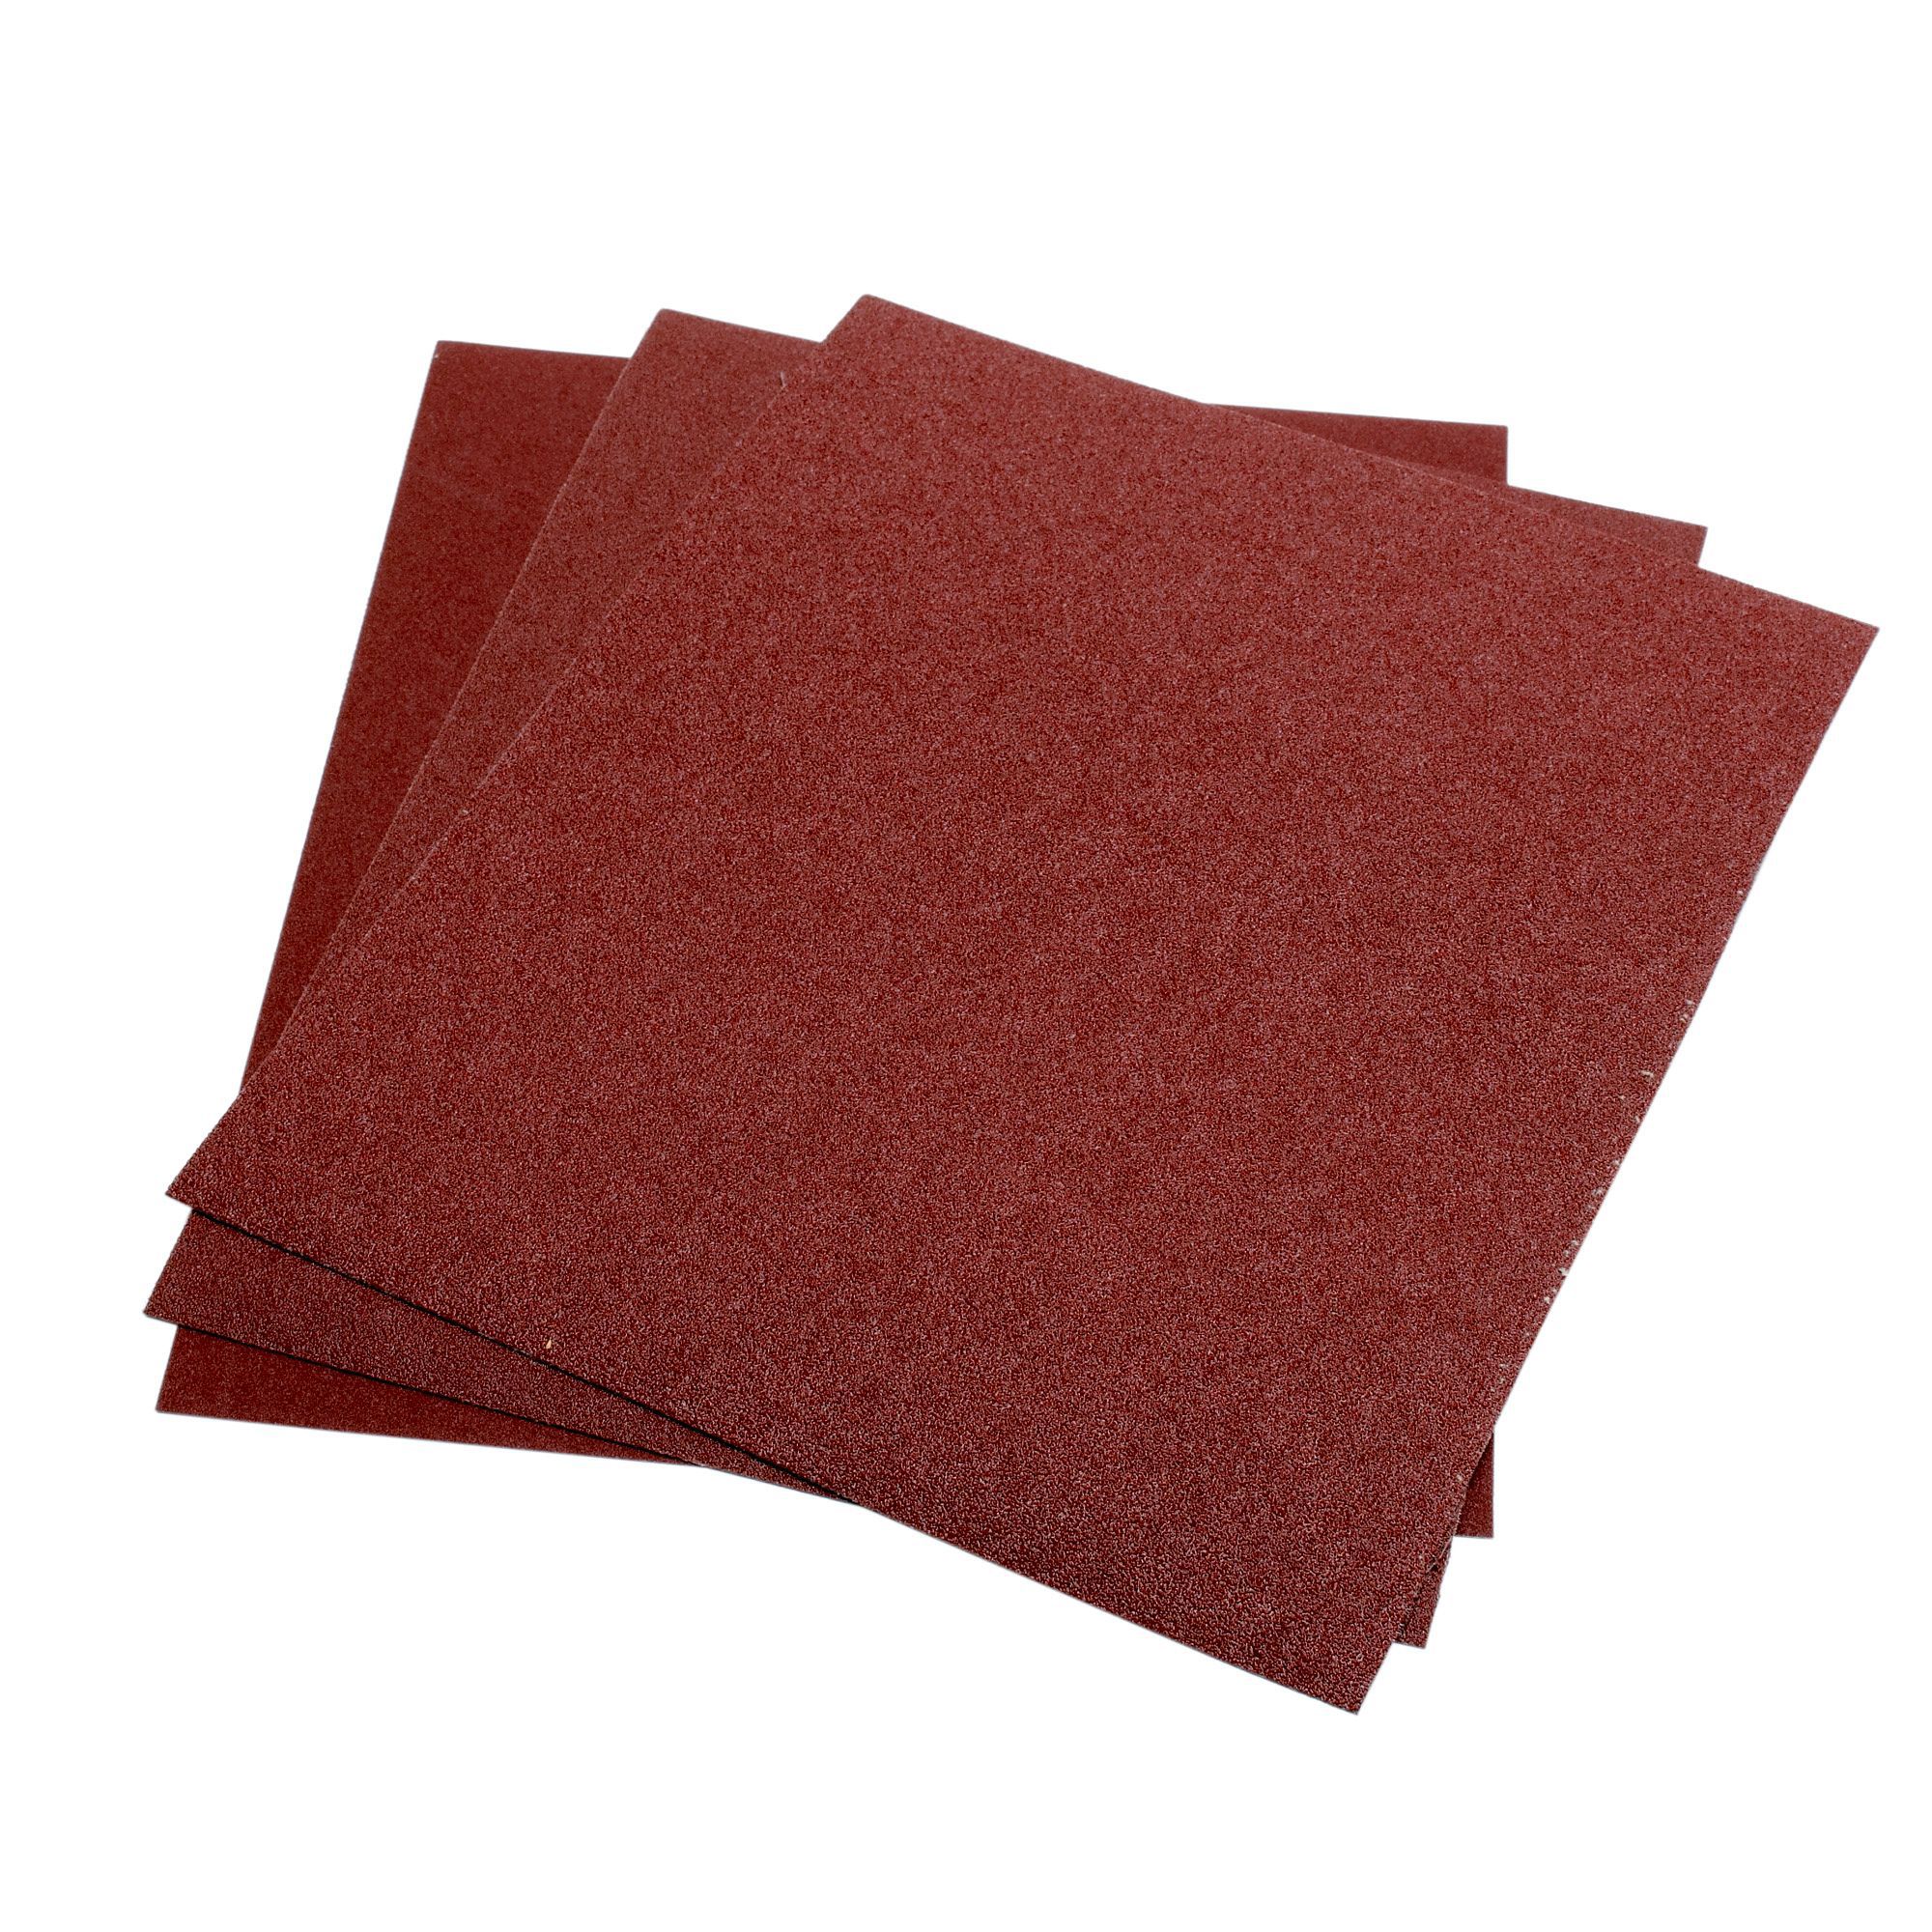 Norton Assorted Hand sanding sheets, Pack of